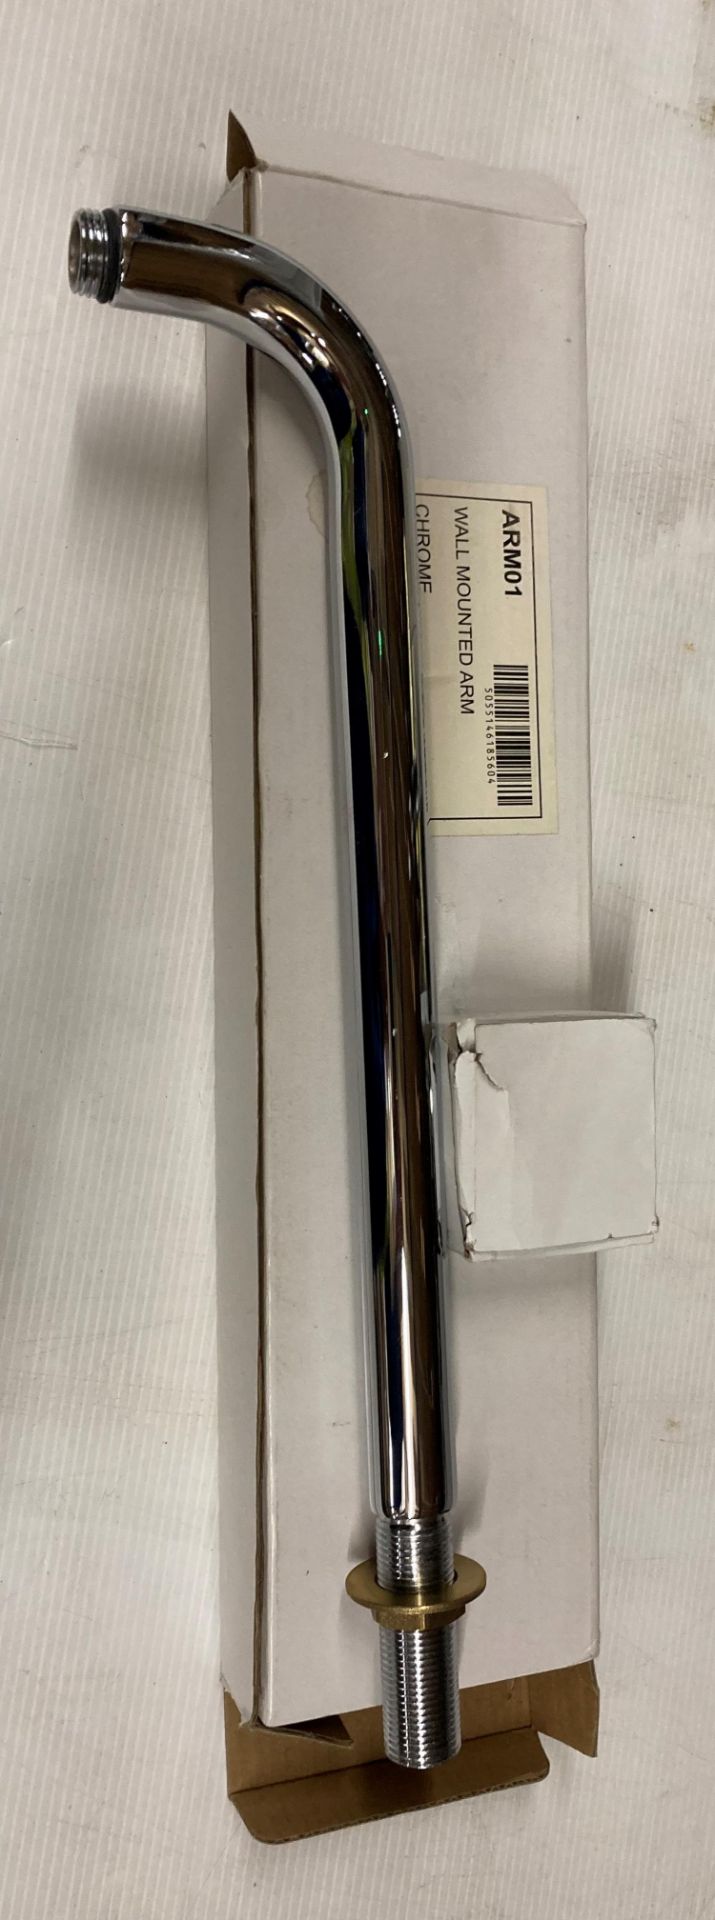 Chrome wall mounted shower arm new and boxed (saleroom location: N10)